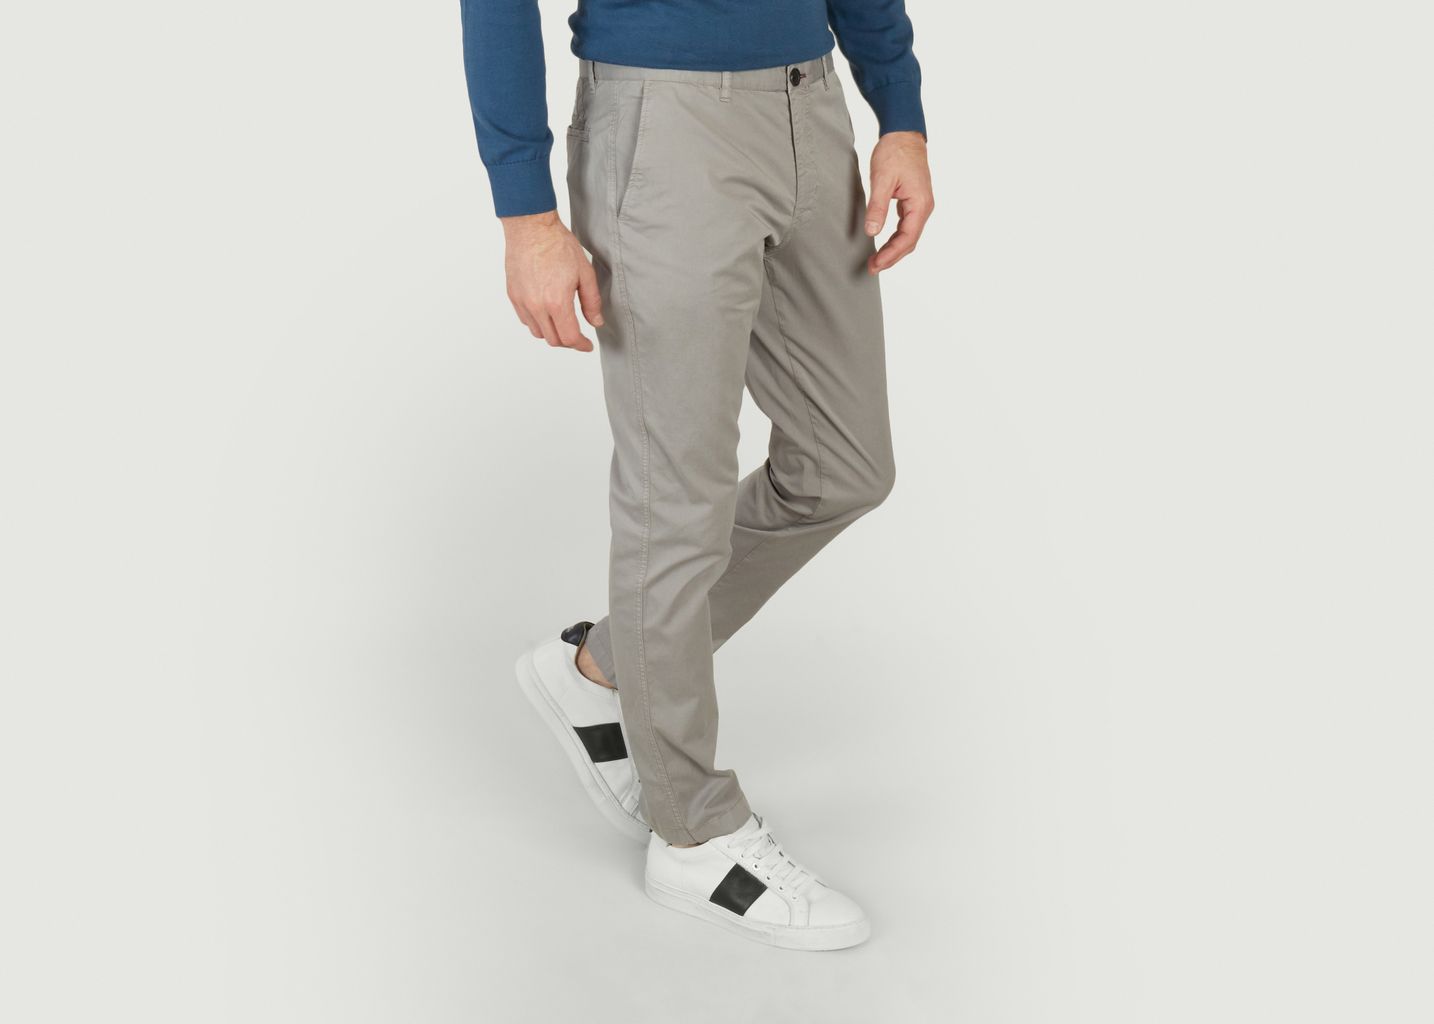 Cotton Slim Fit Chino - PS by PAUL SMITH